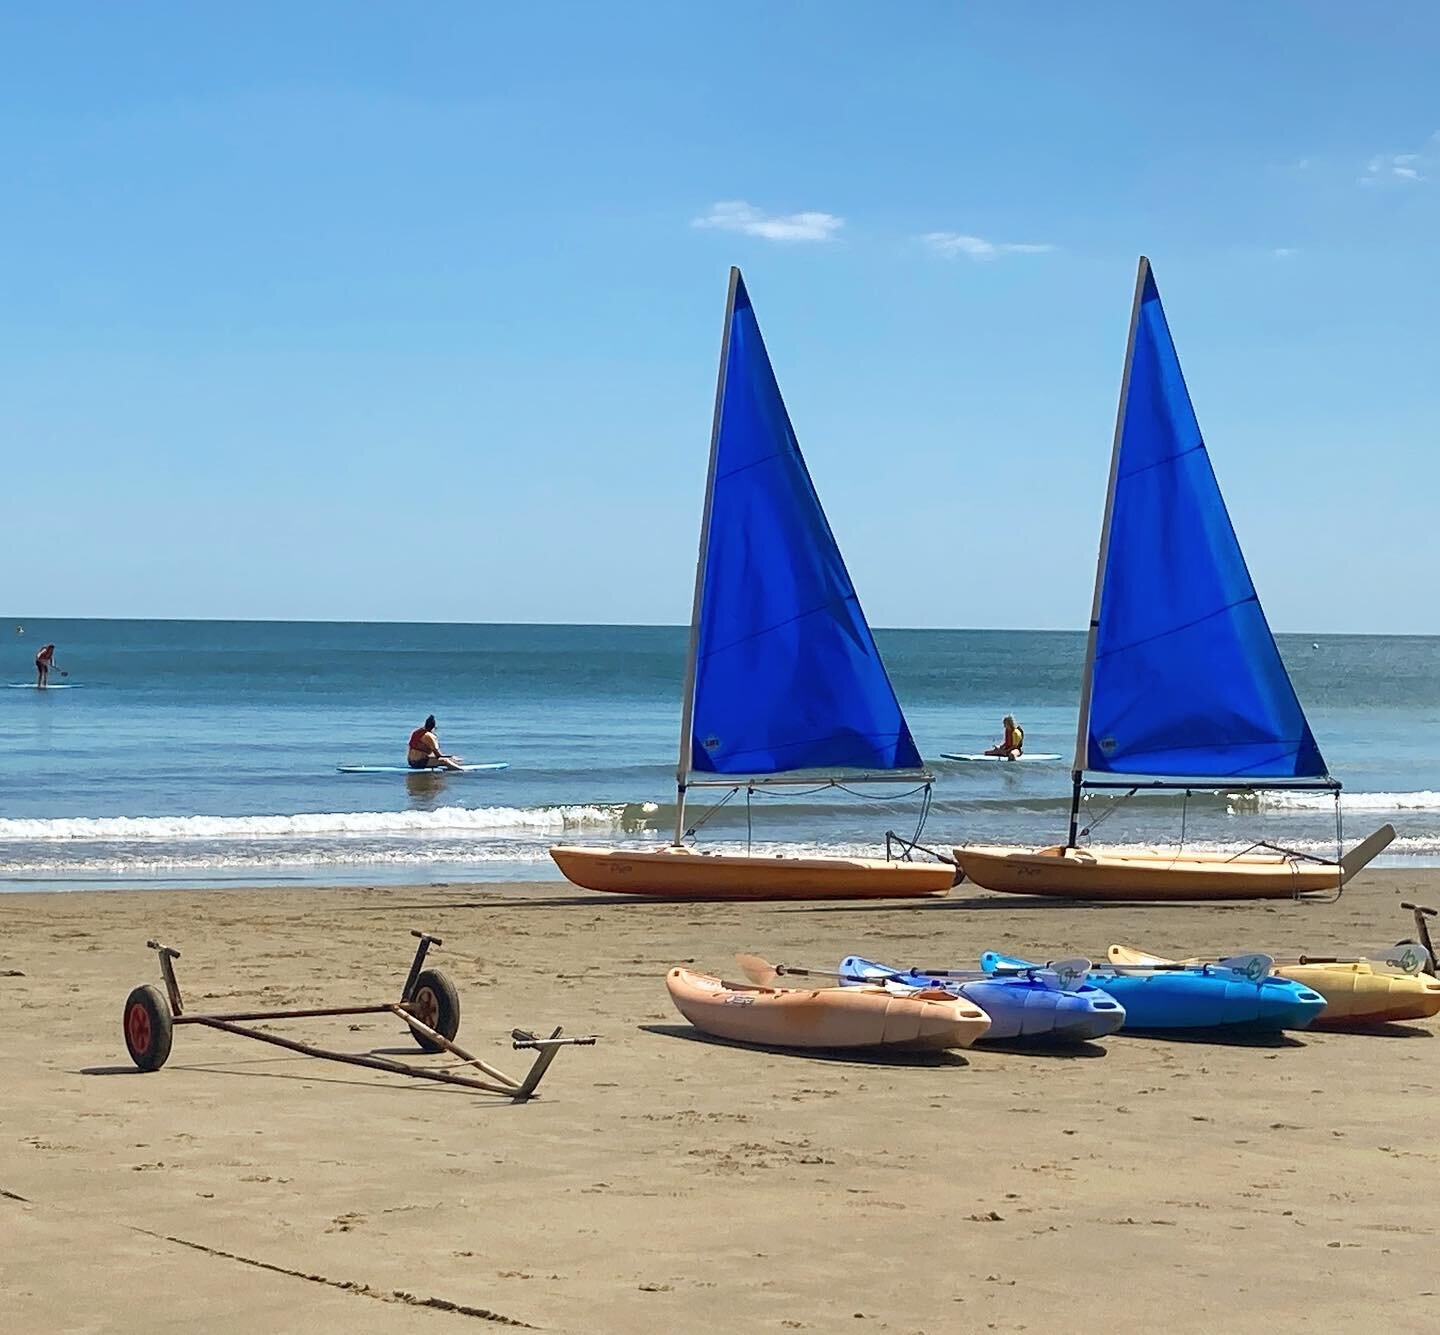 We coordinated our sails and kayaks with the skies and seas today&hellip;. 💙💙

#beachlife #sailinghire #paddleboards #kayakhire #beachbums #picos #blueskies